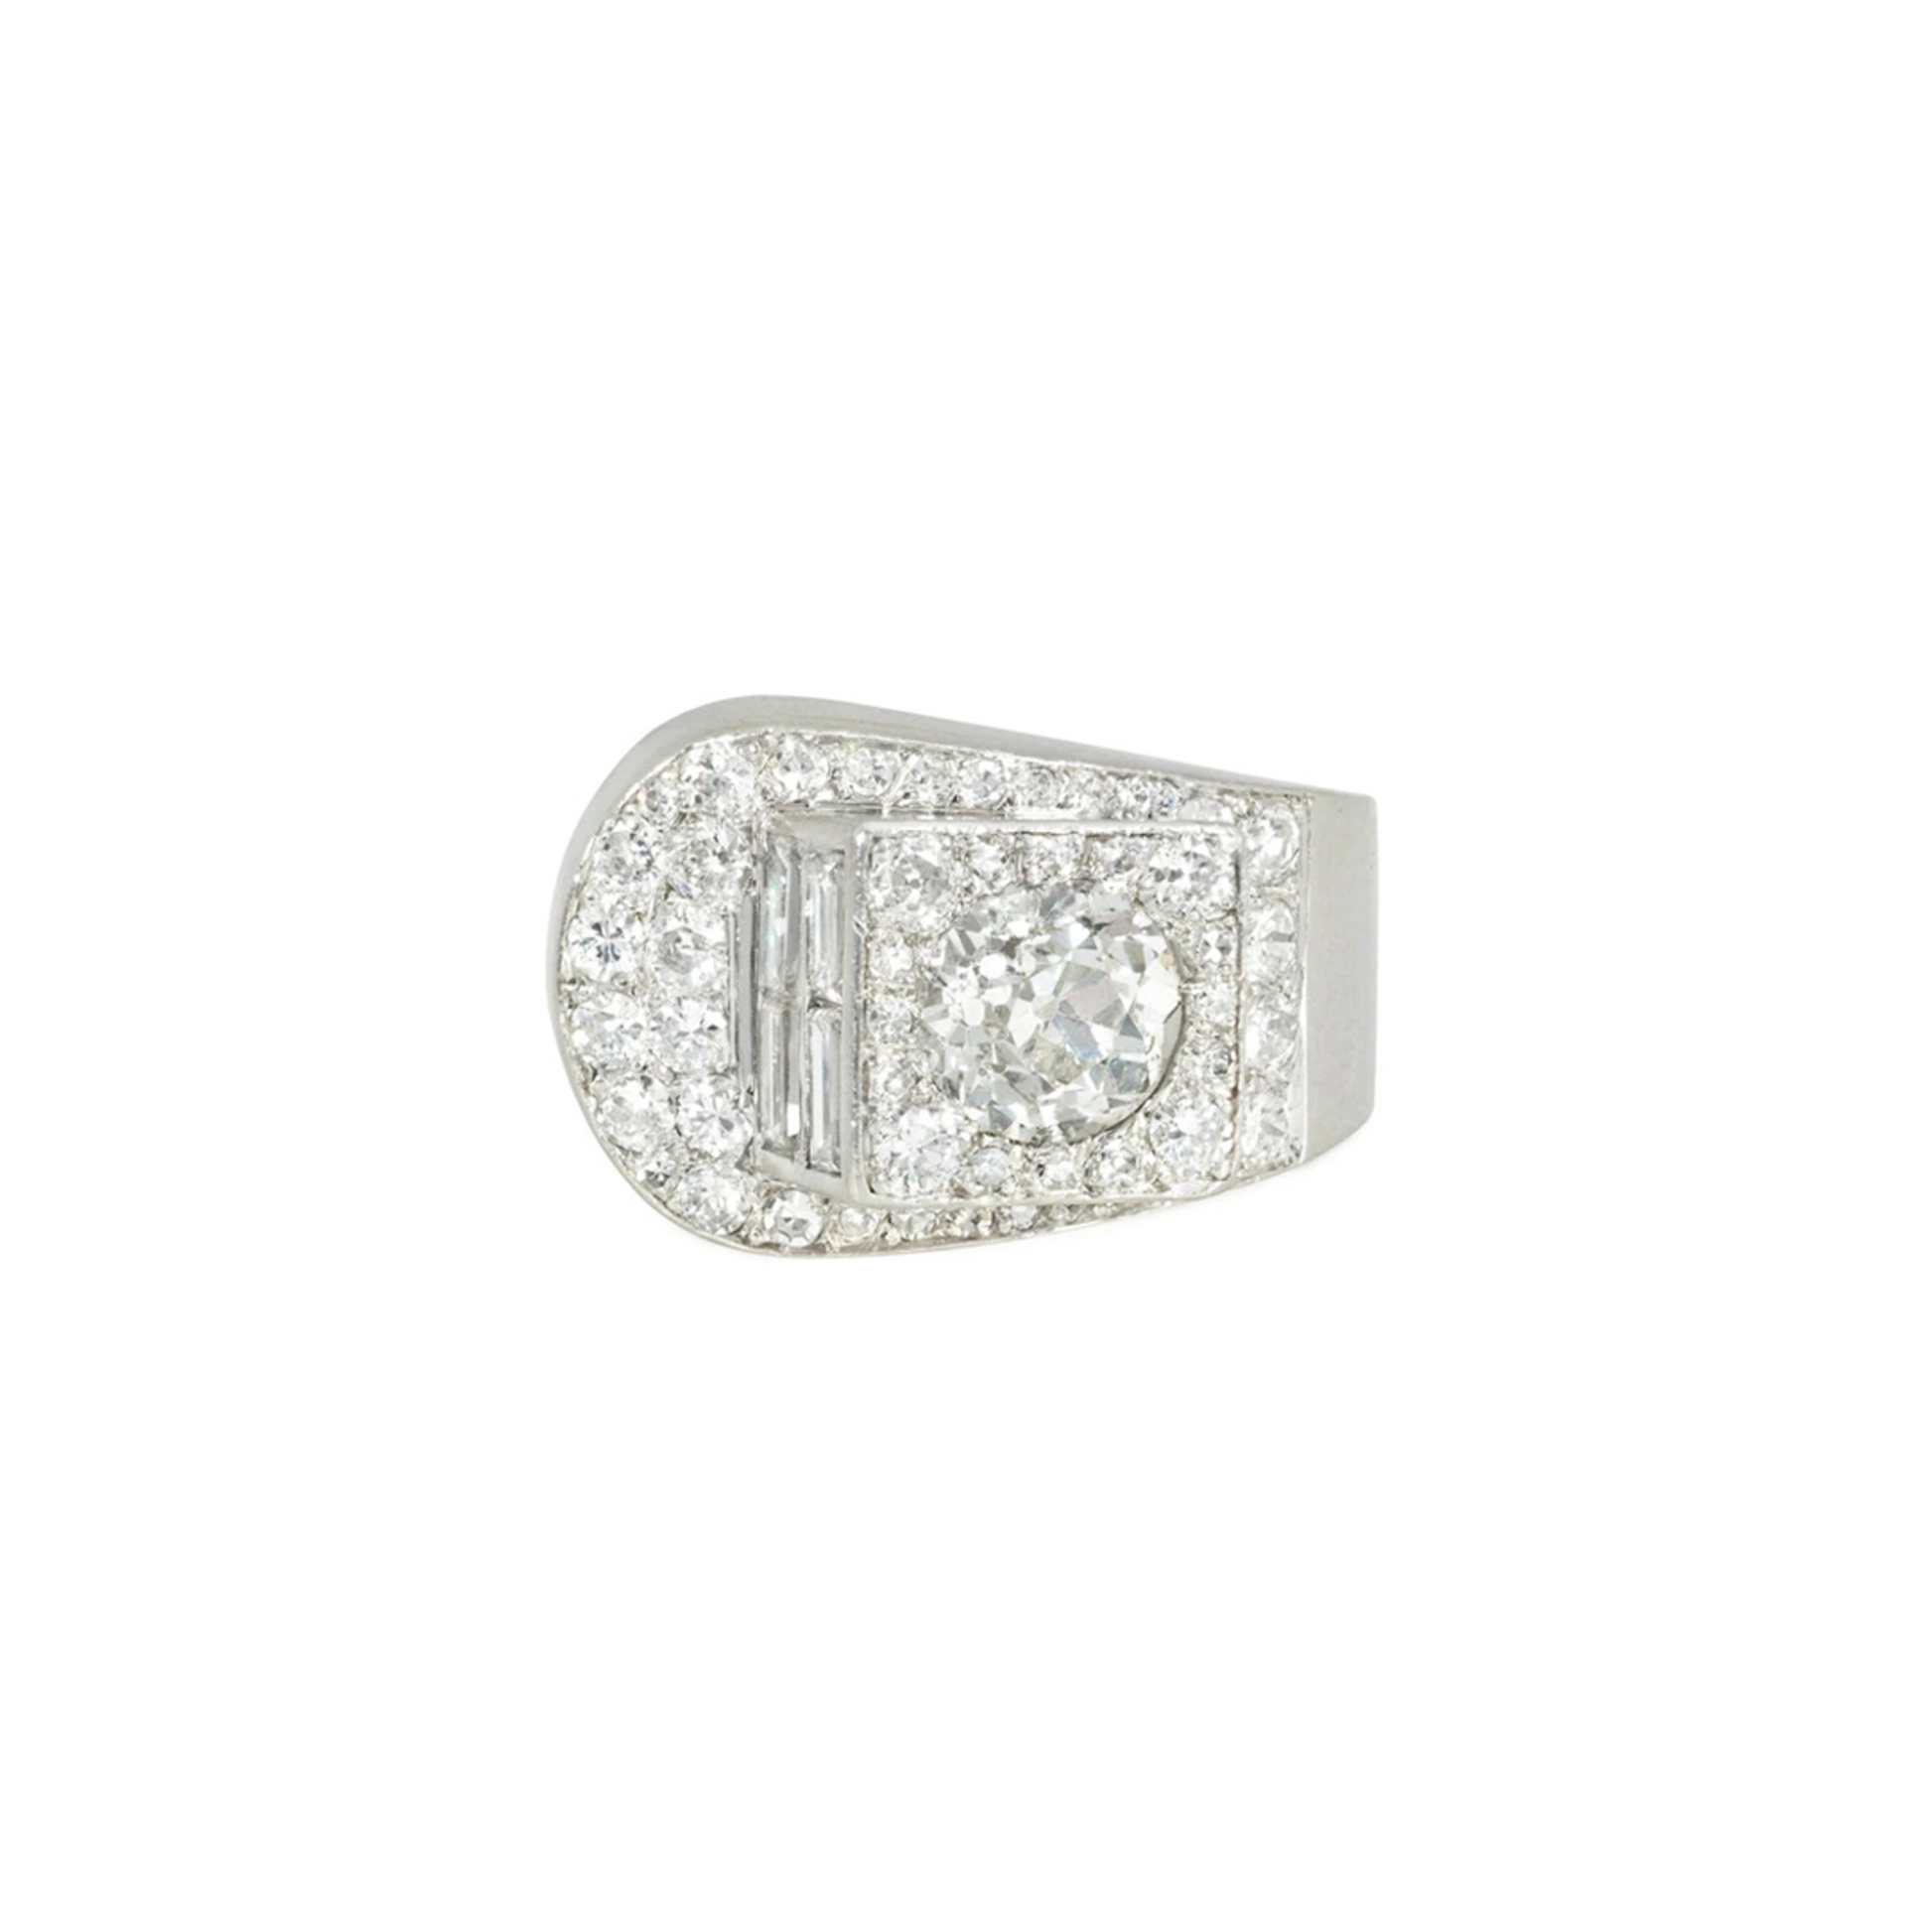 French Art Deco Platinum Diamond Stylized Buckle Ring front